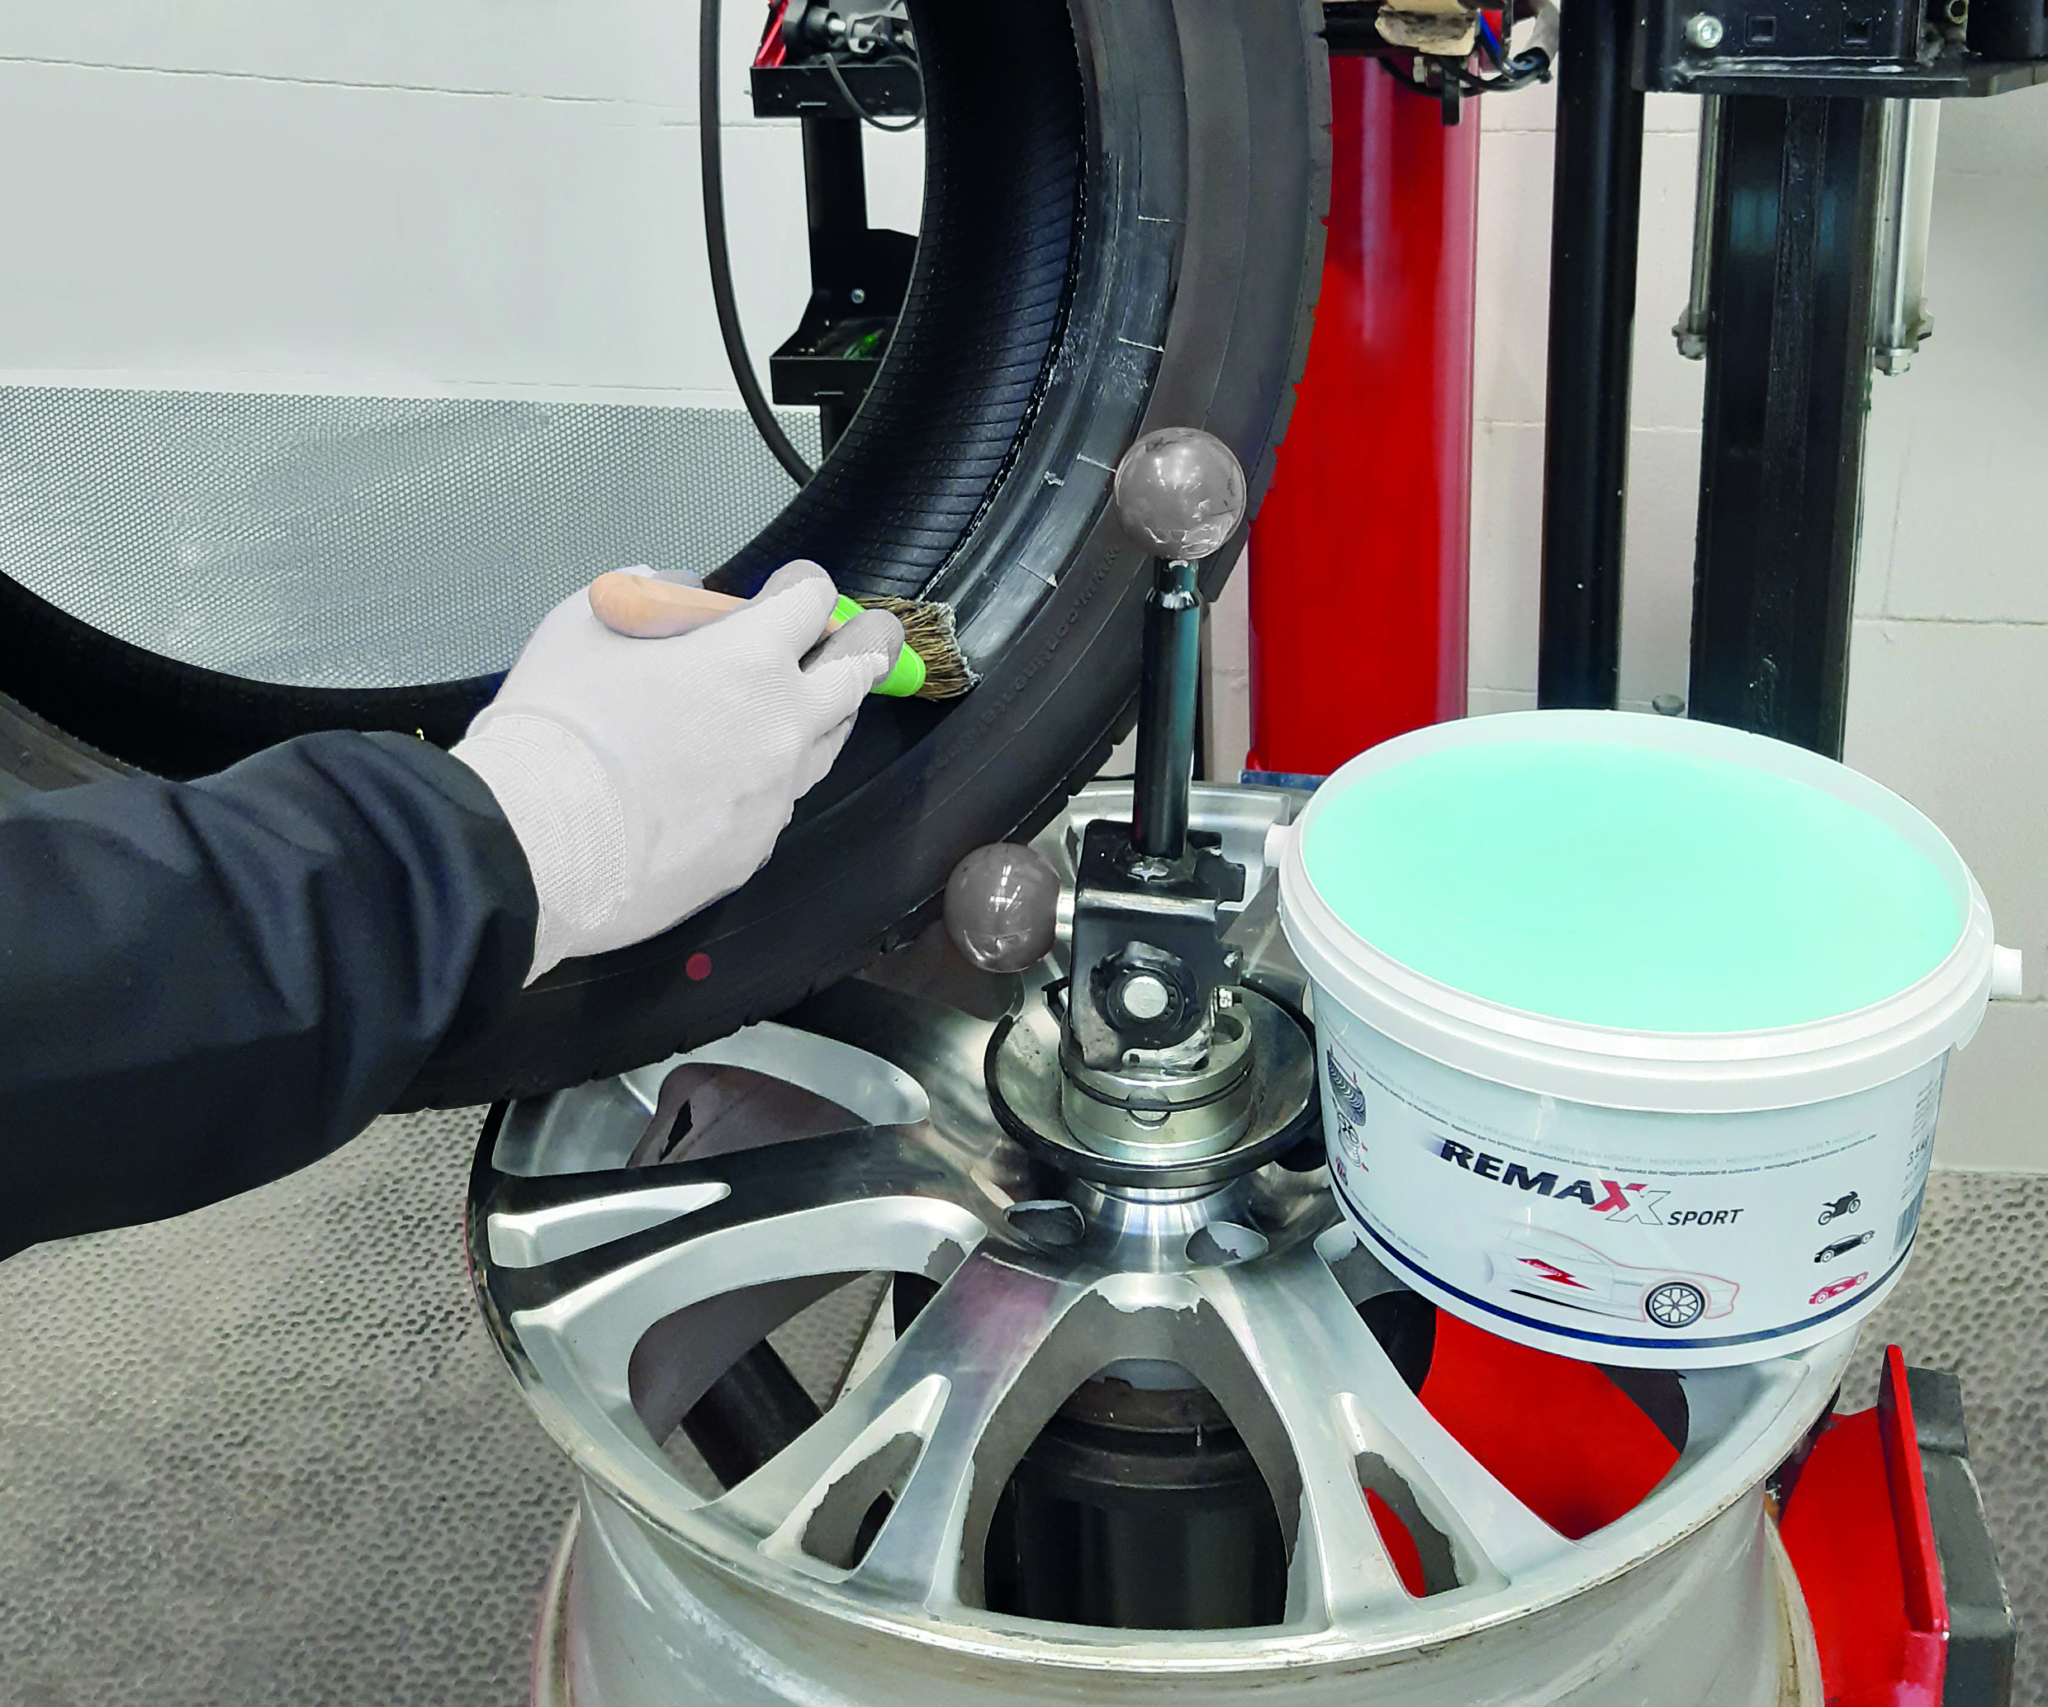 Remaxx Sport tyre paste also suits electric vehicles